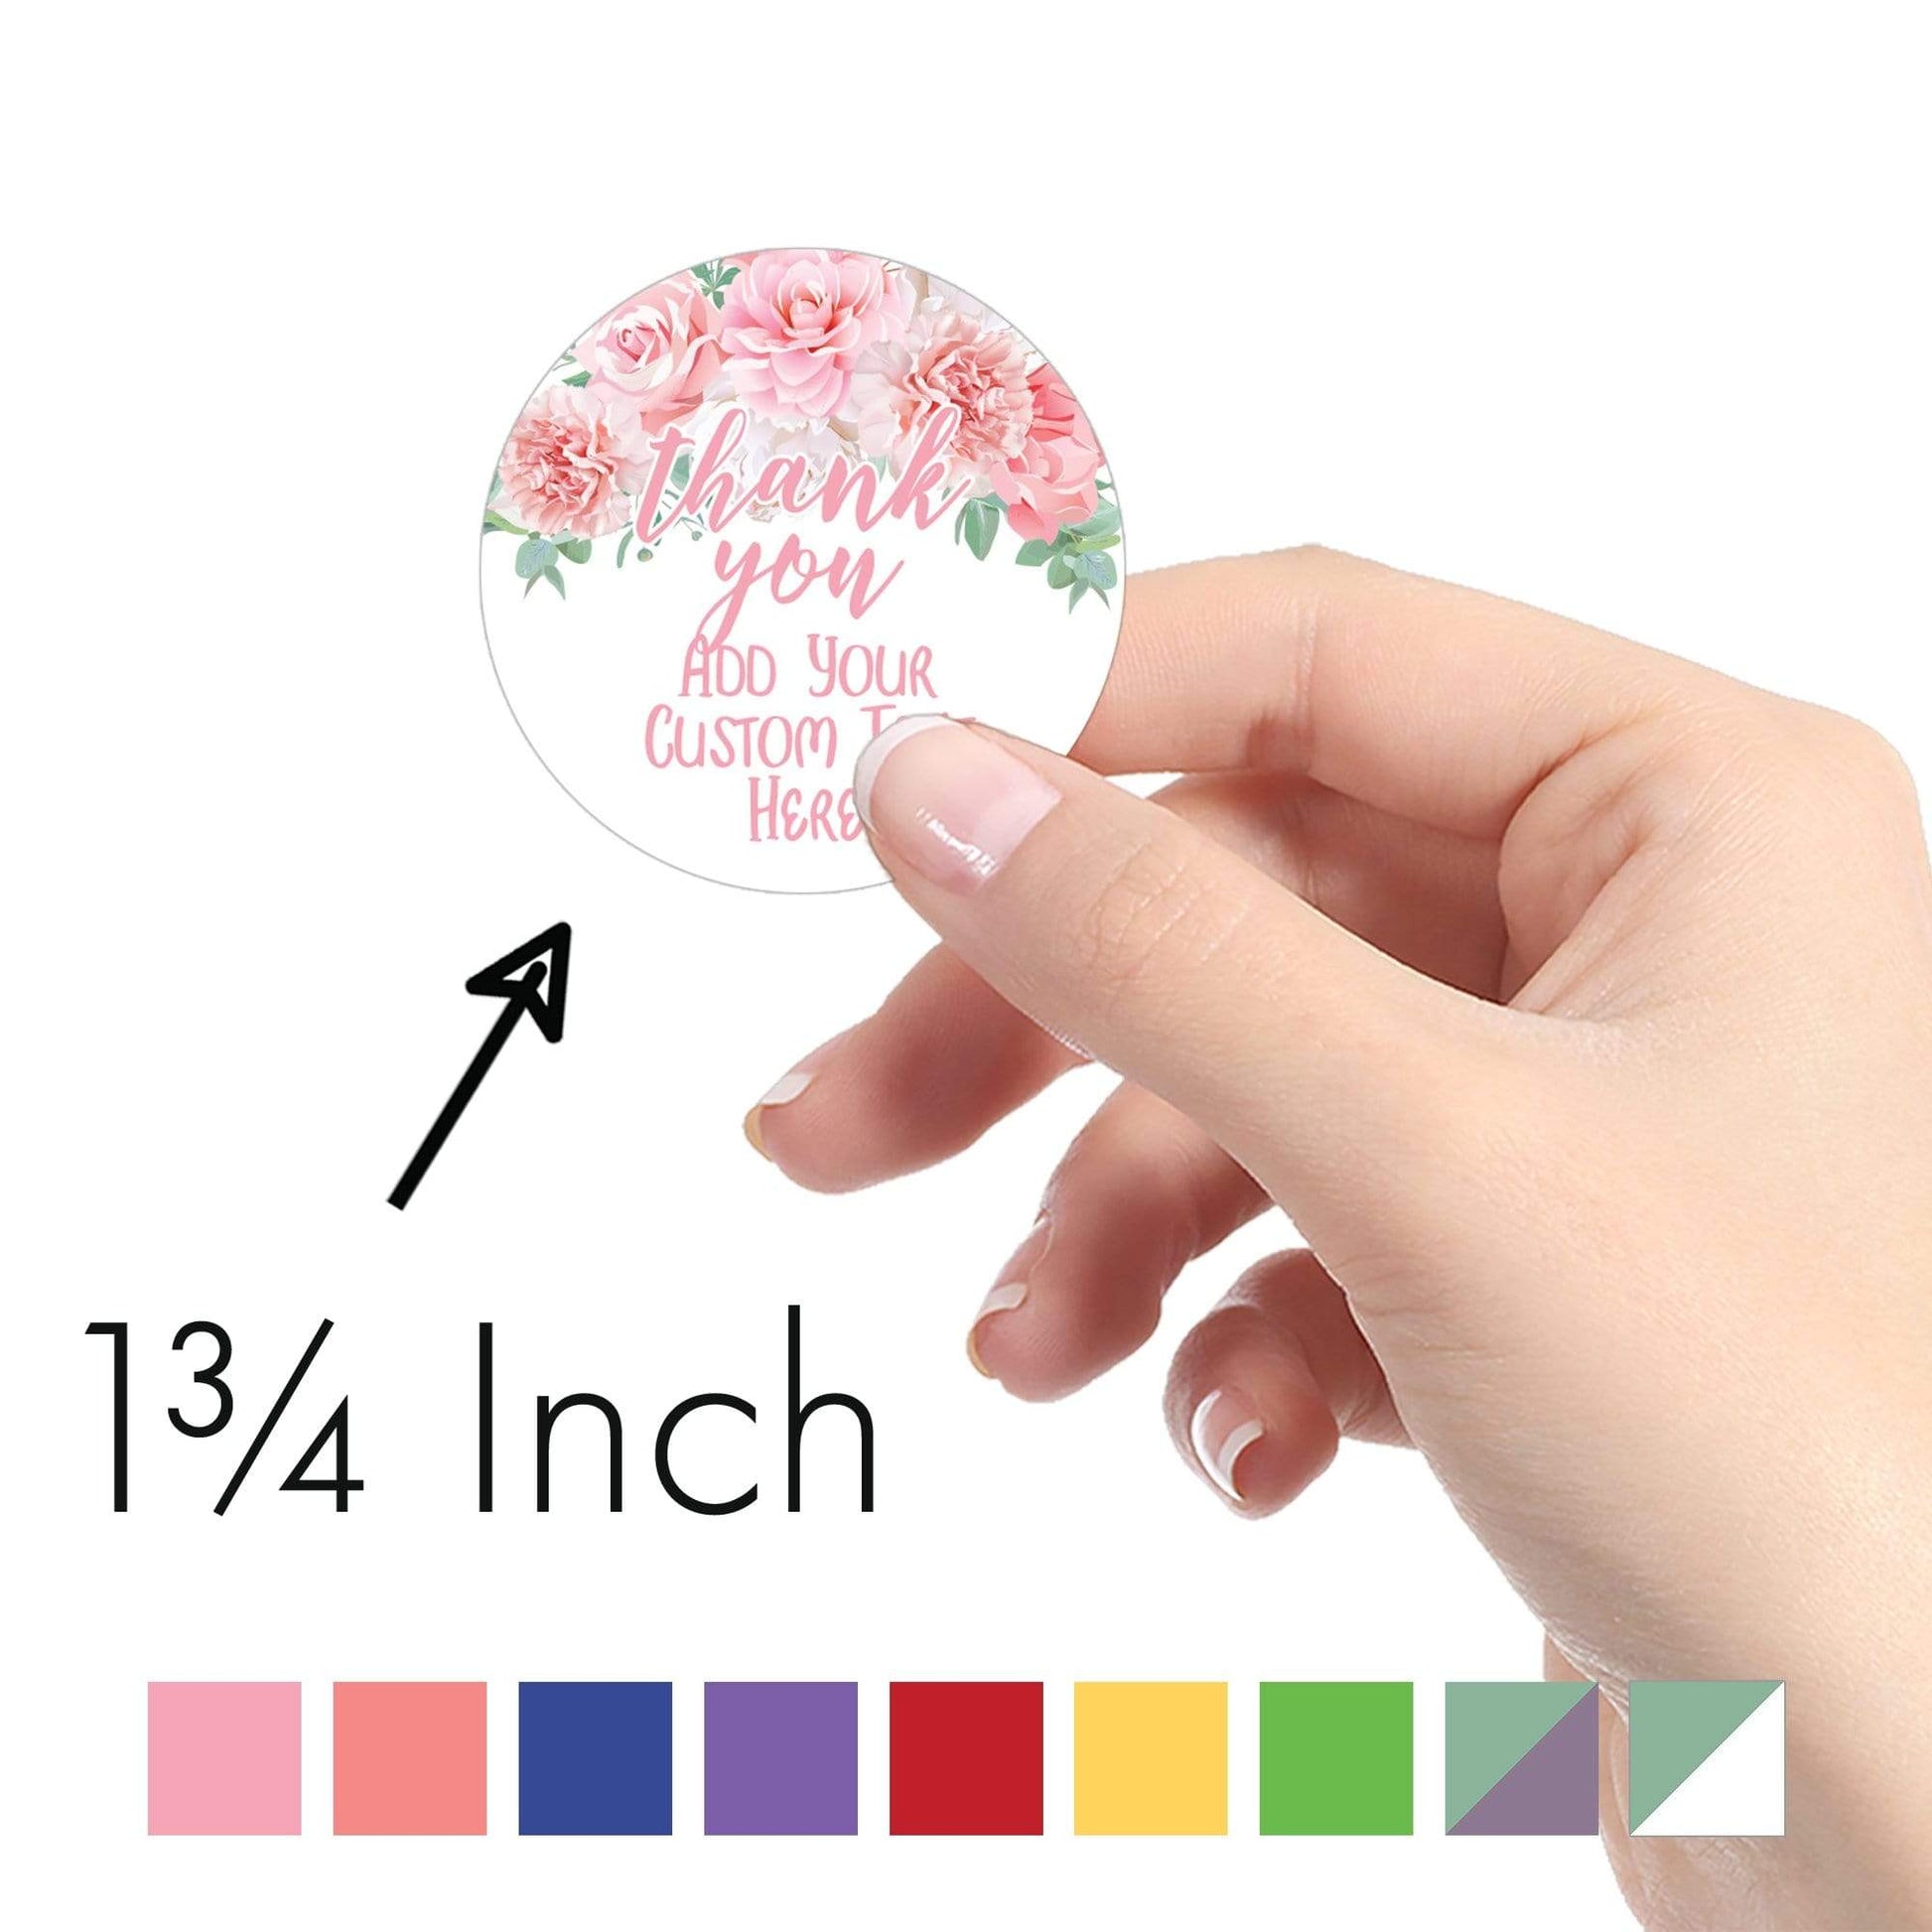 Personalized Thank You Circle Stickers - 40 Count